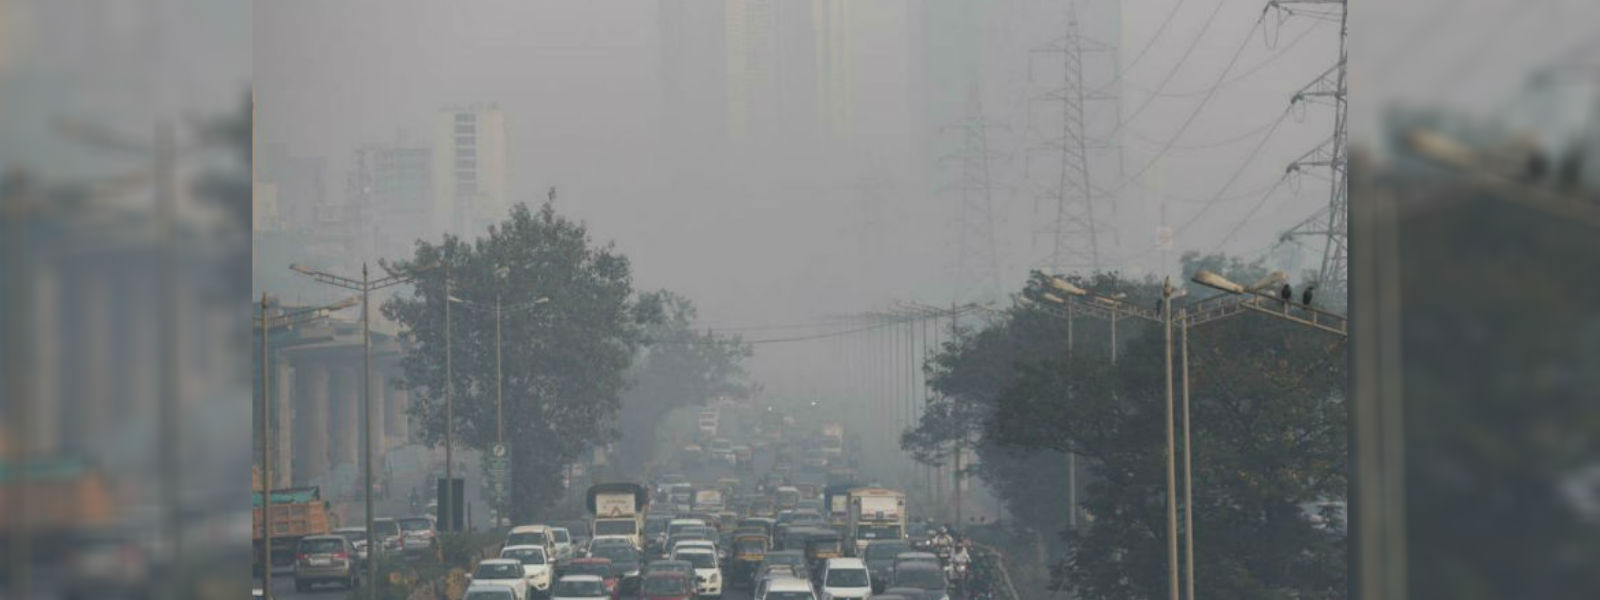 New unit for measuring Colombo city’s air pollution